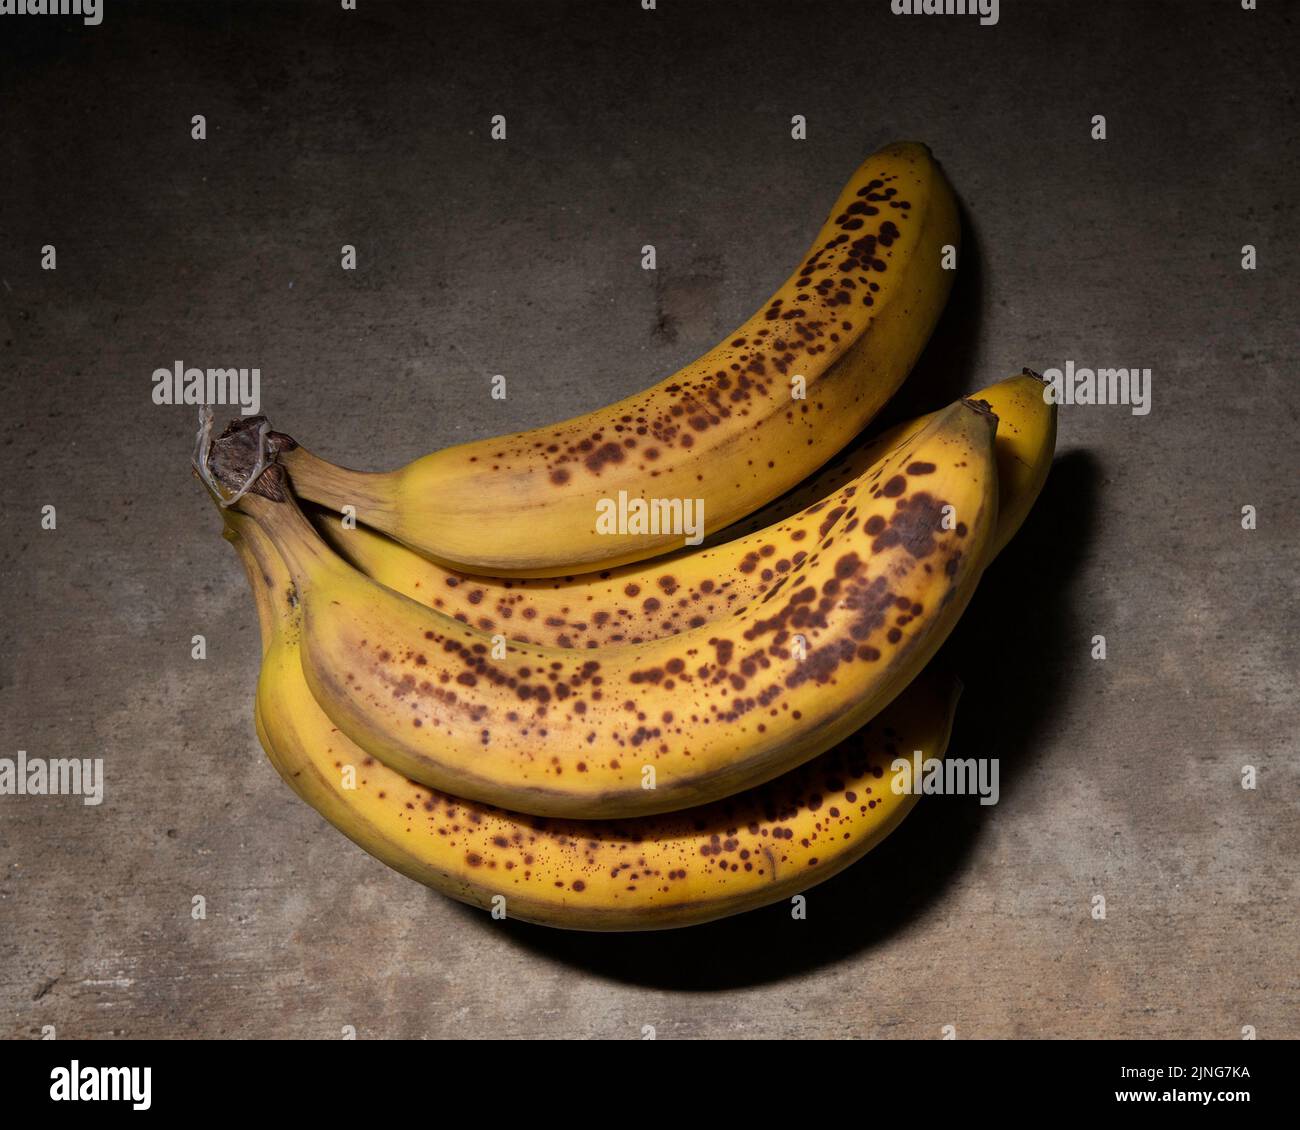 Close up of ripe mottled bananas against a concrete background. Stock Photo